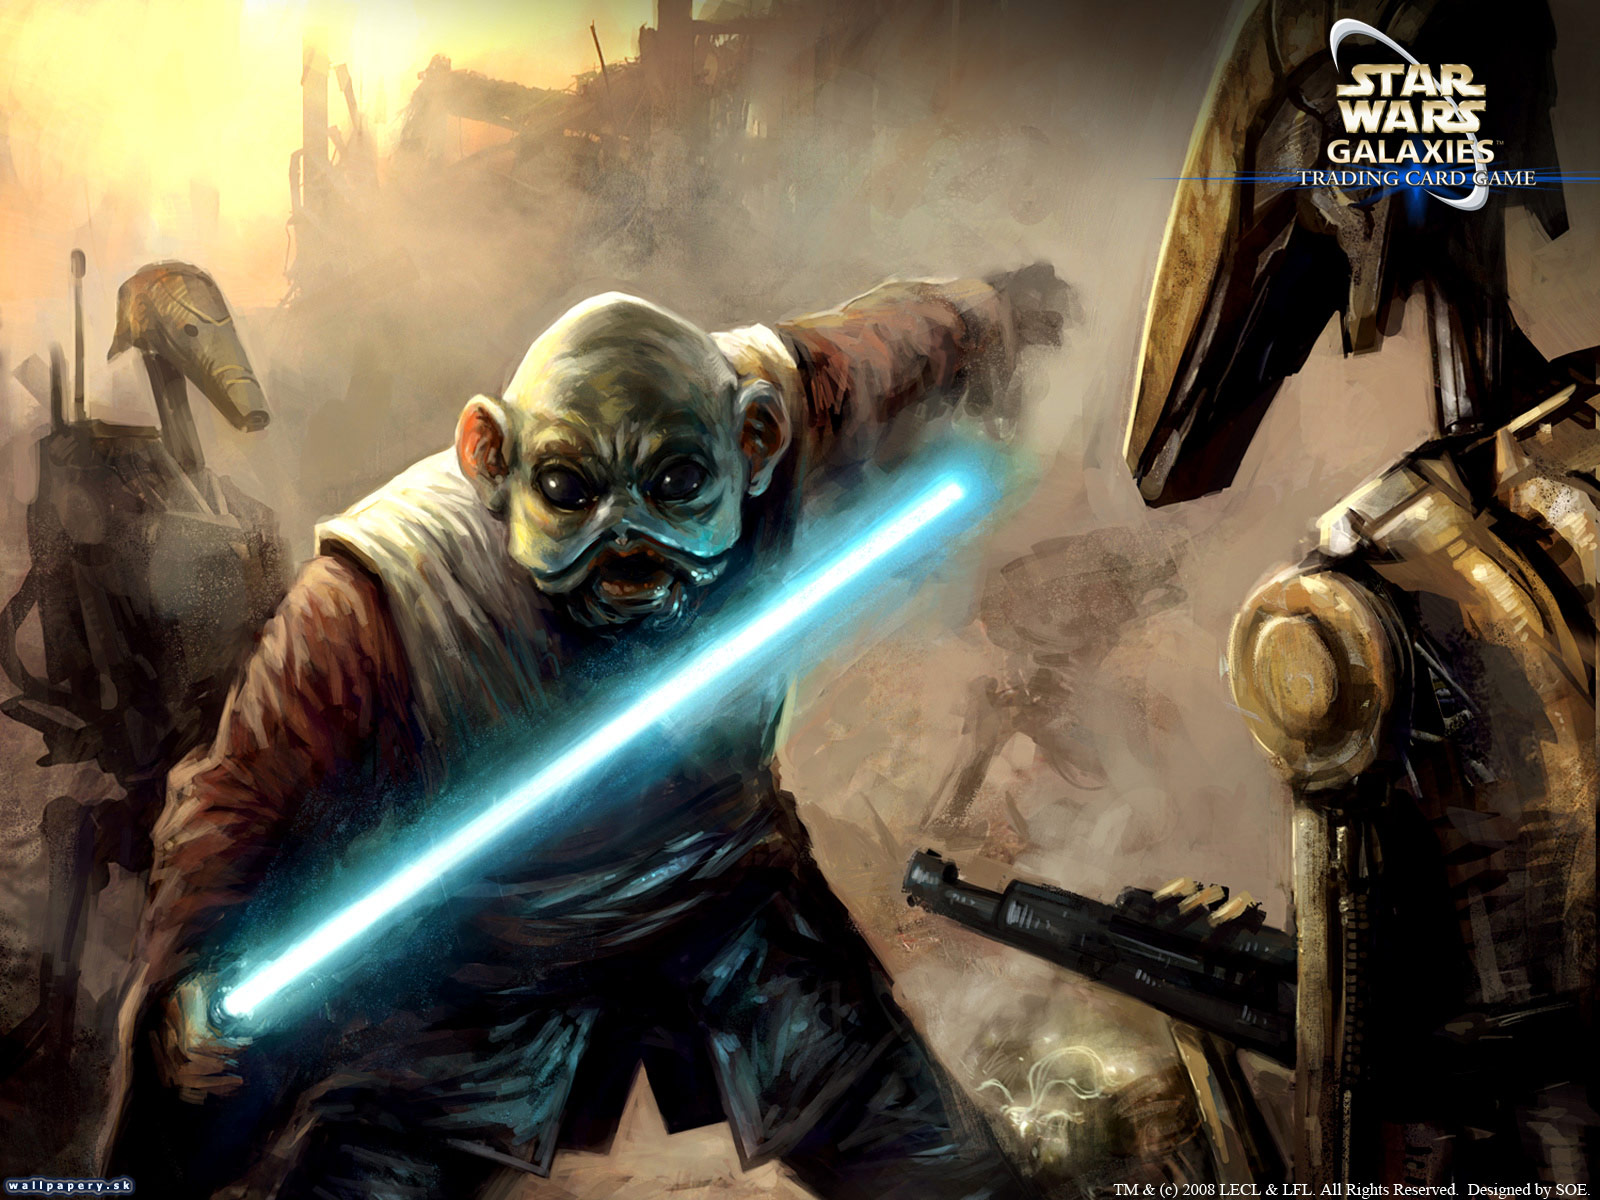 Star Wars Galaxies - Trading Card Game: Champions of the Force - wallpaper 4